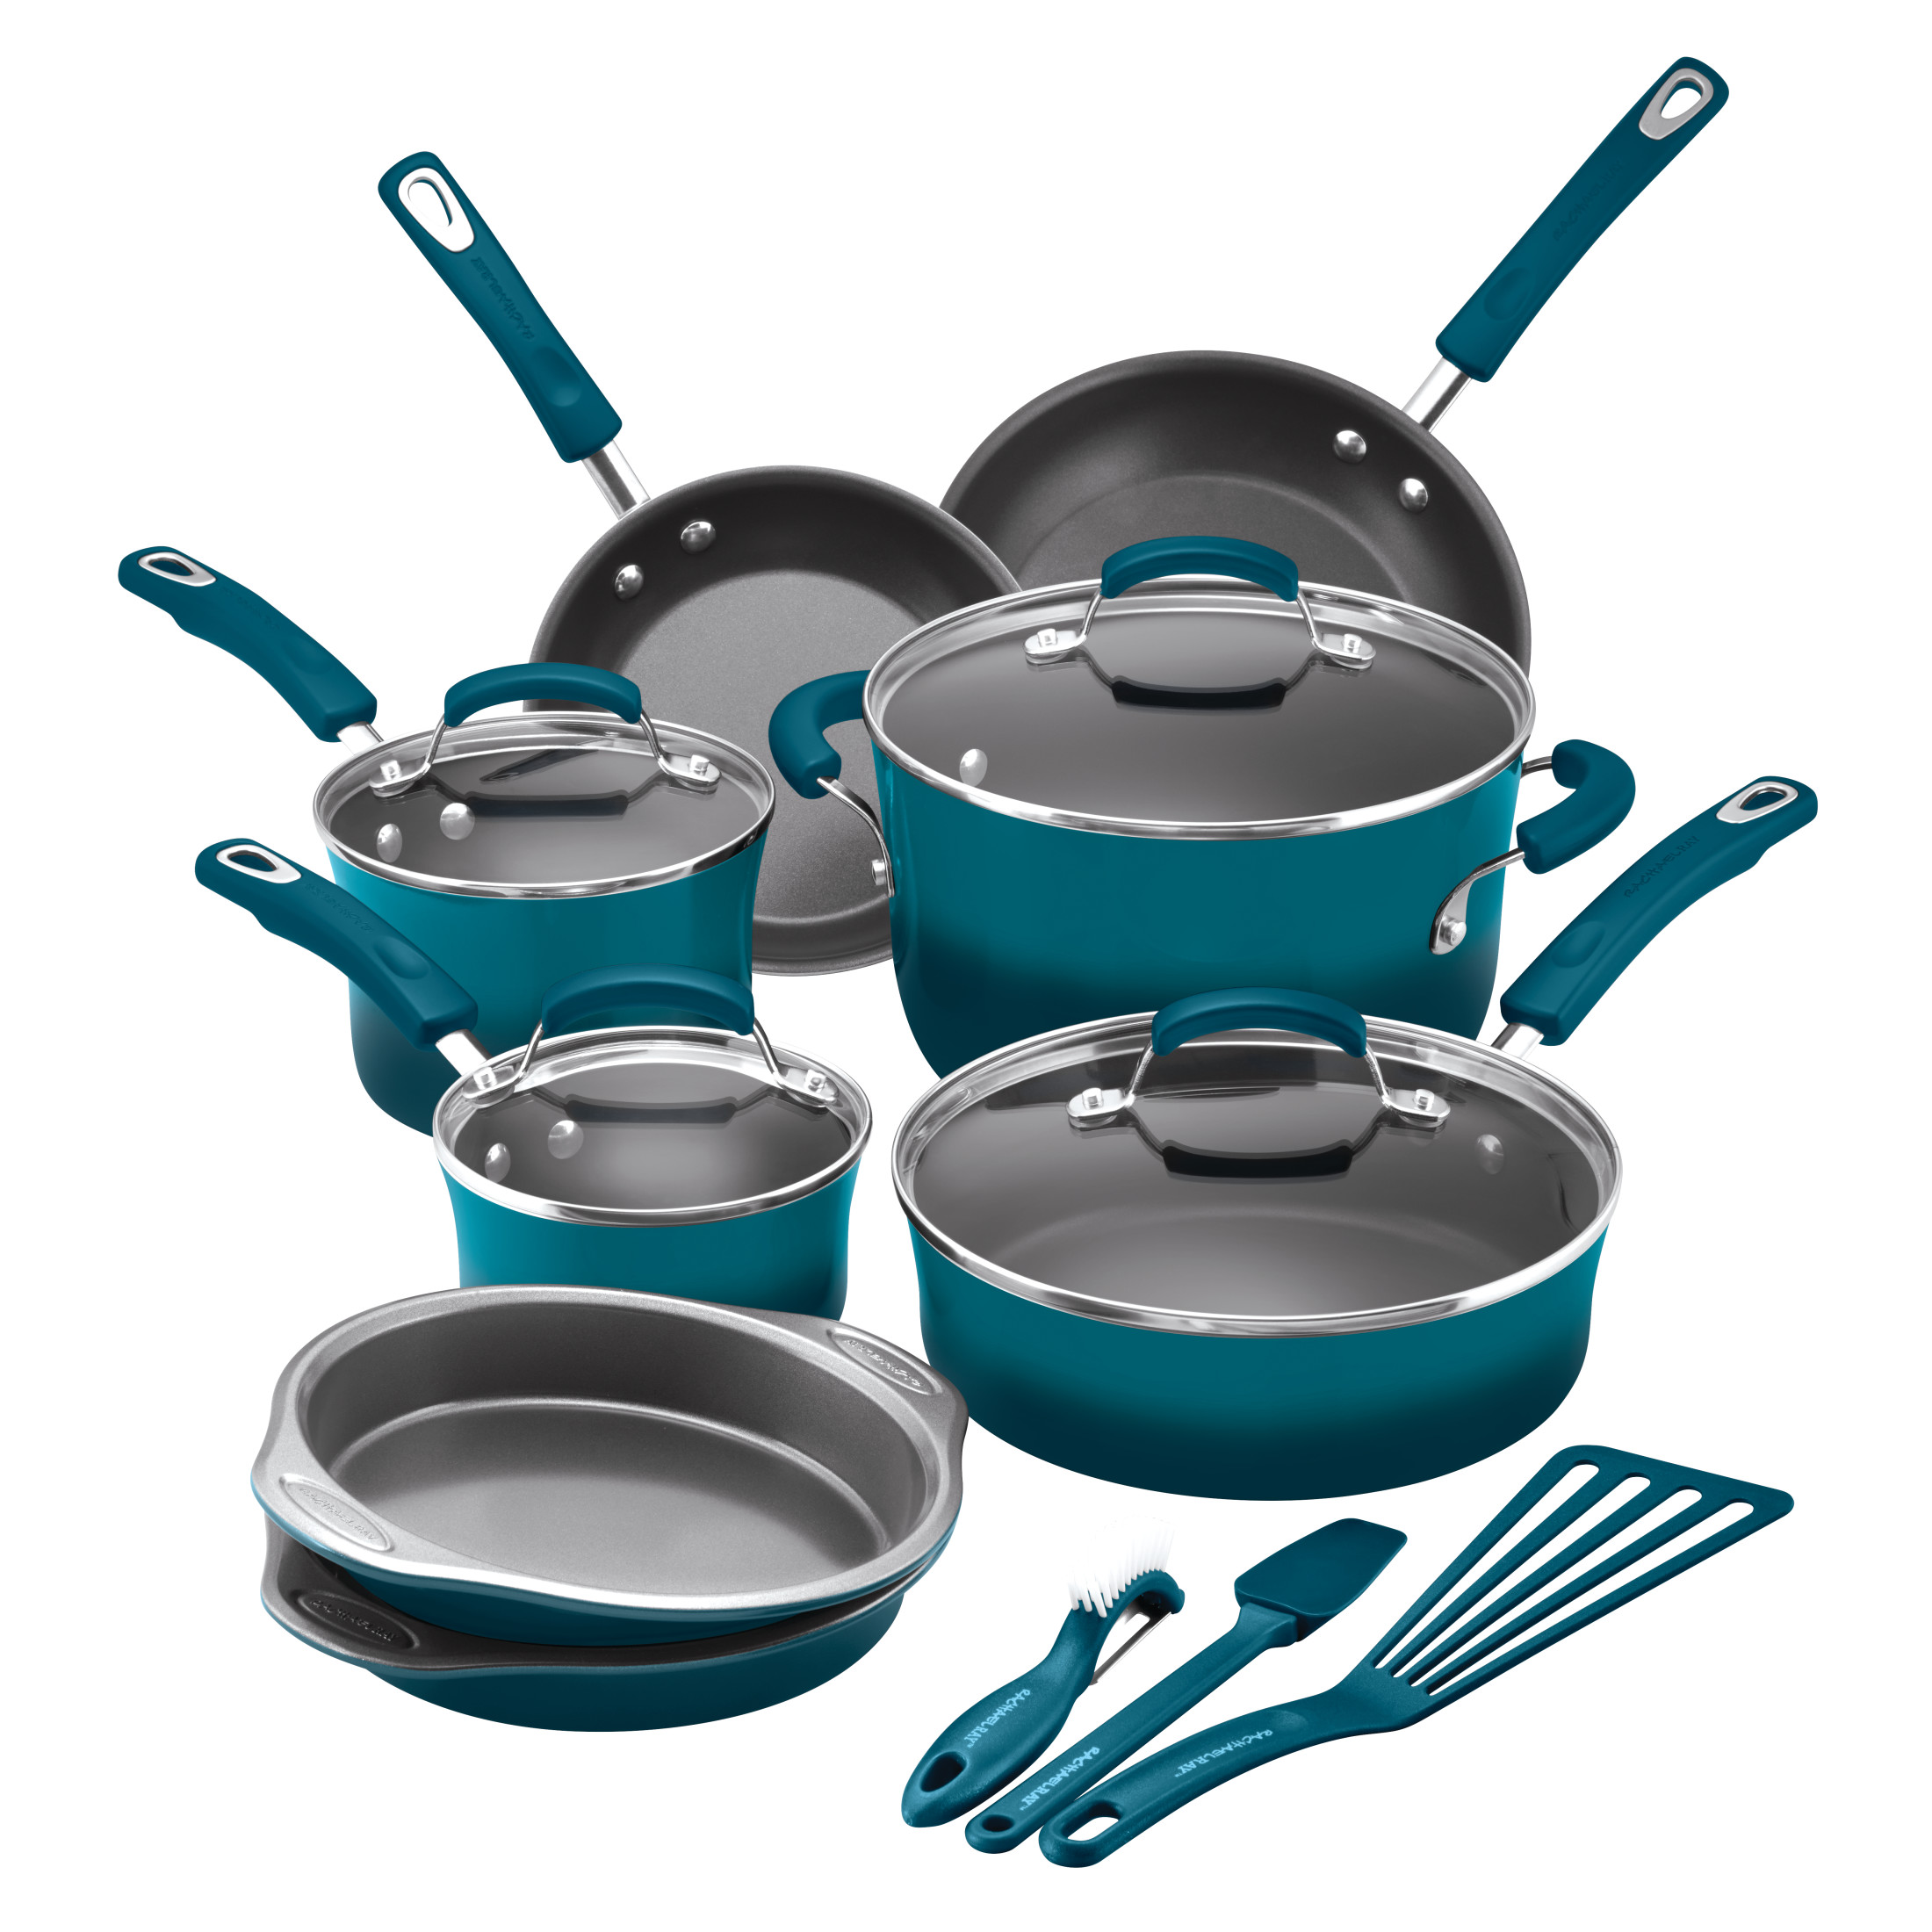 Rachael Ray 15 Piece Nonstick Pots and Pans Set, Marine Blue - image 1 of 15